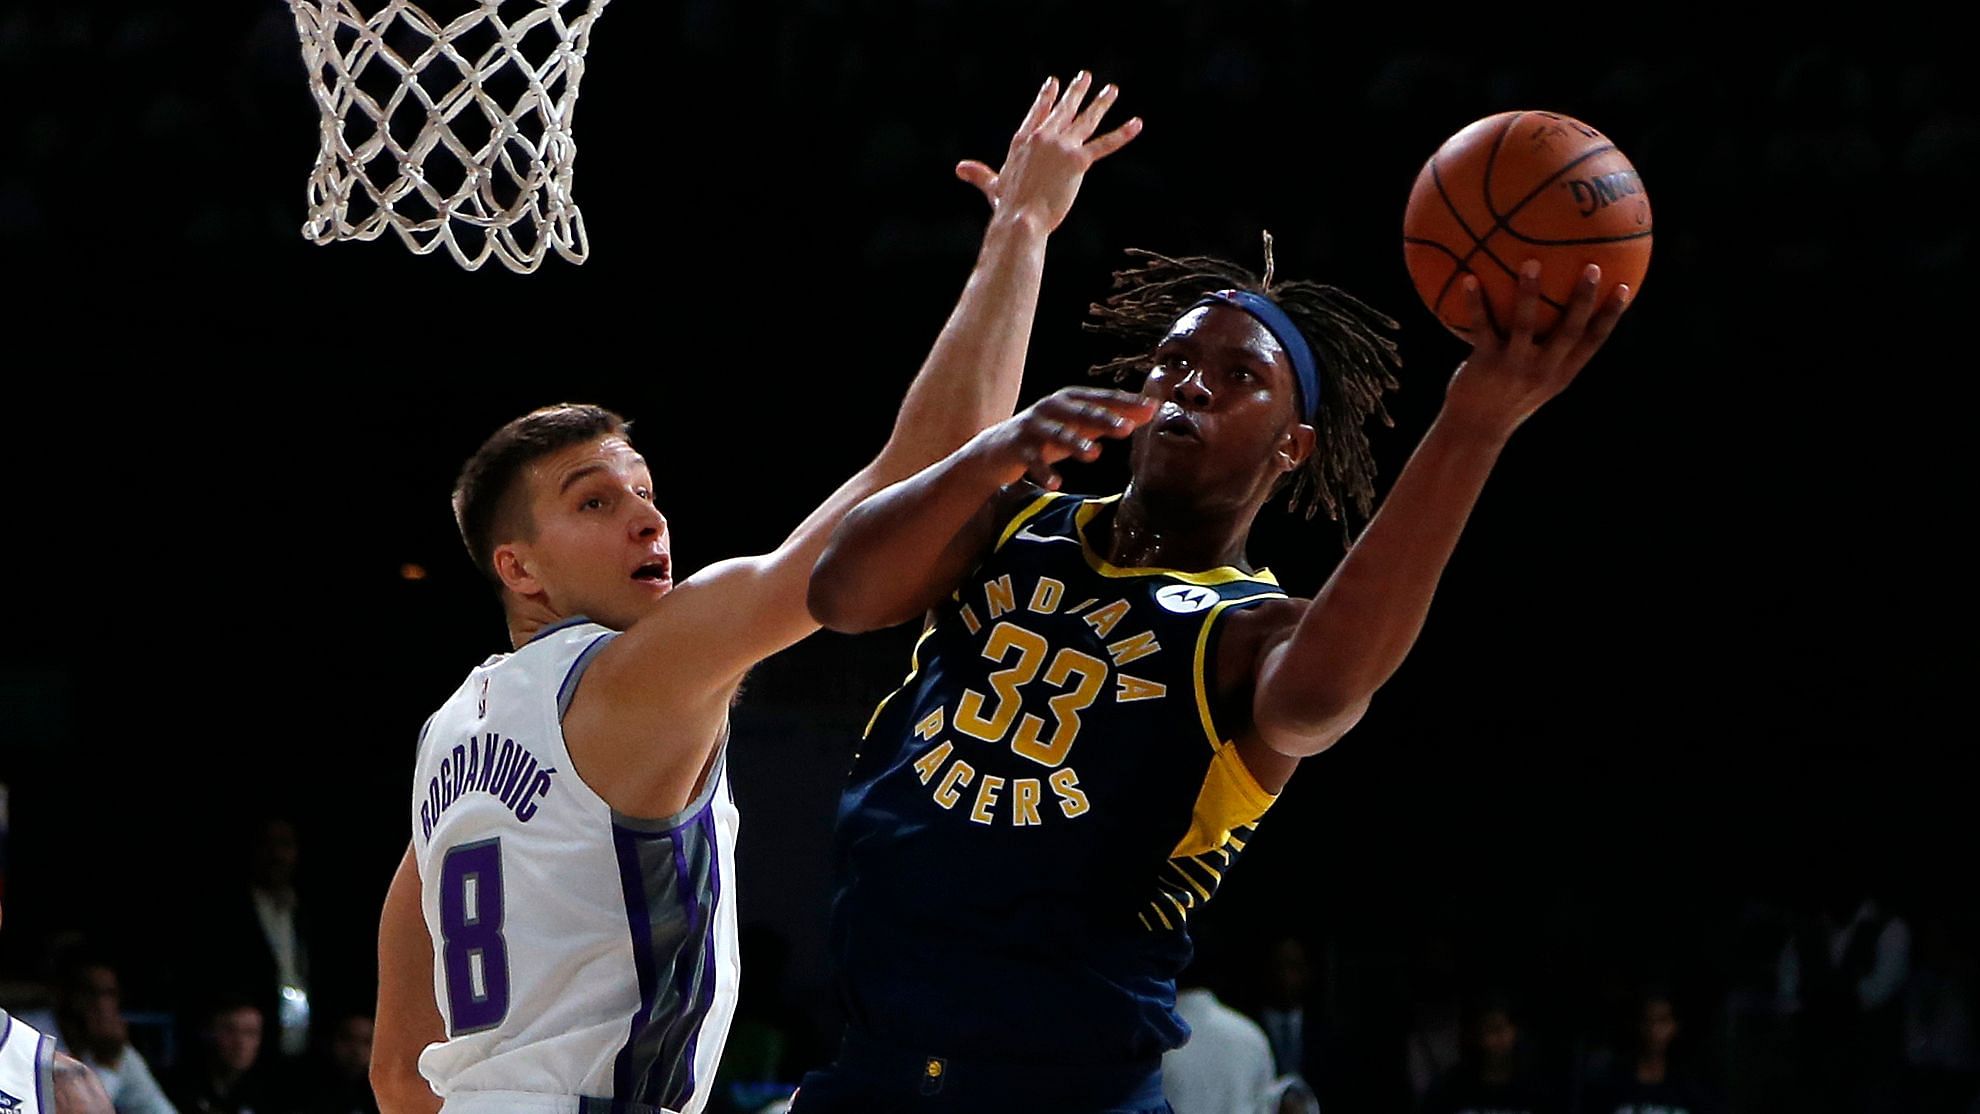 Indiana Pacers’ player Myles Turner aims for the net during a match against Sacramento Kings at the NBA India Games.